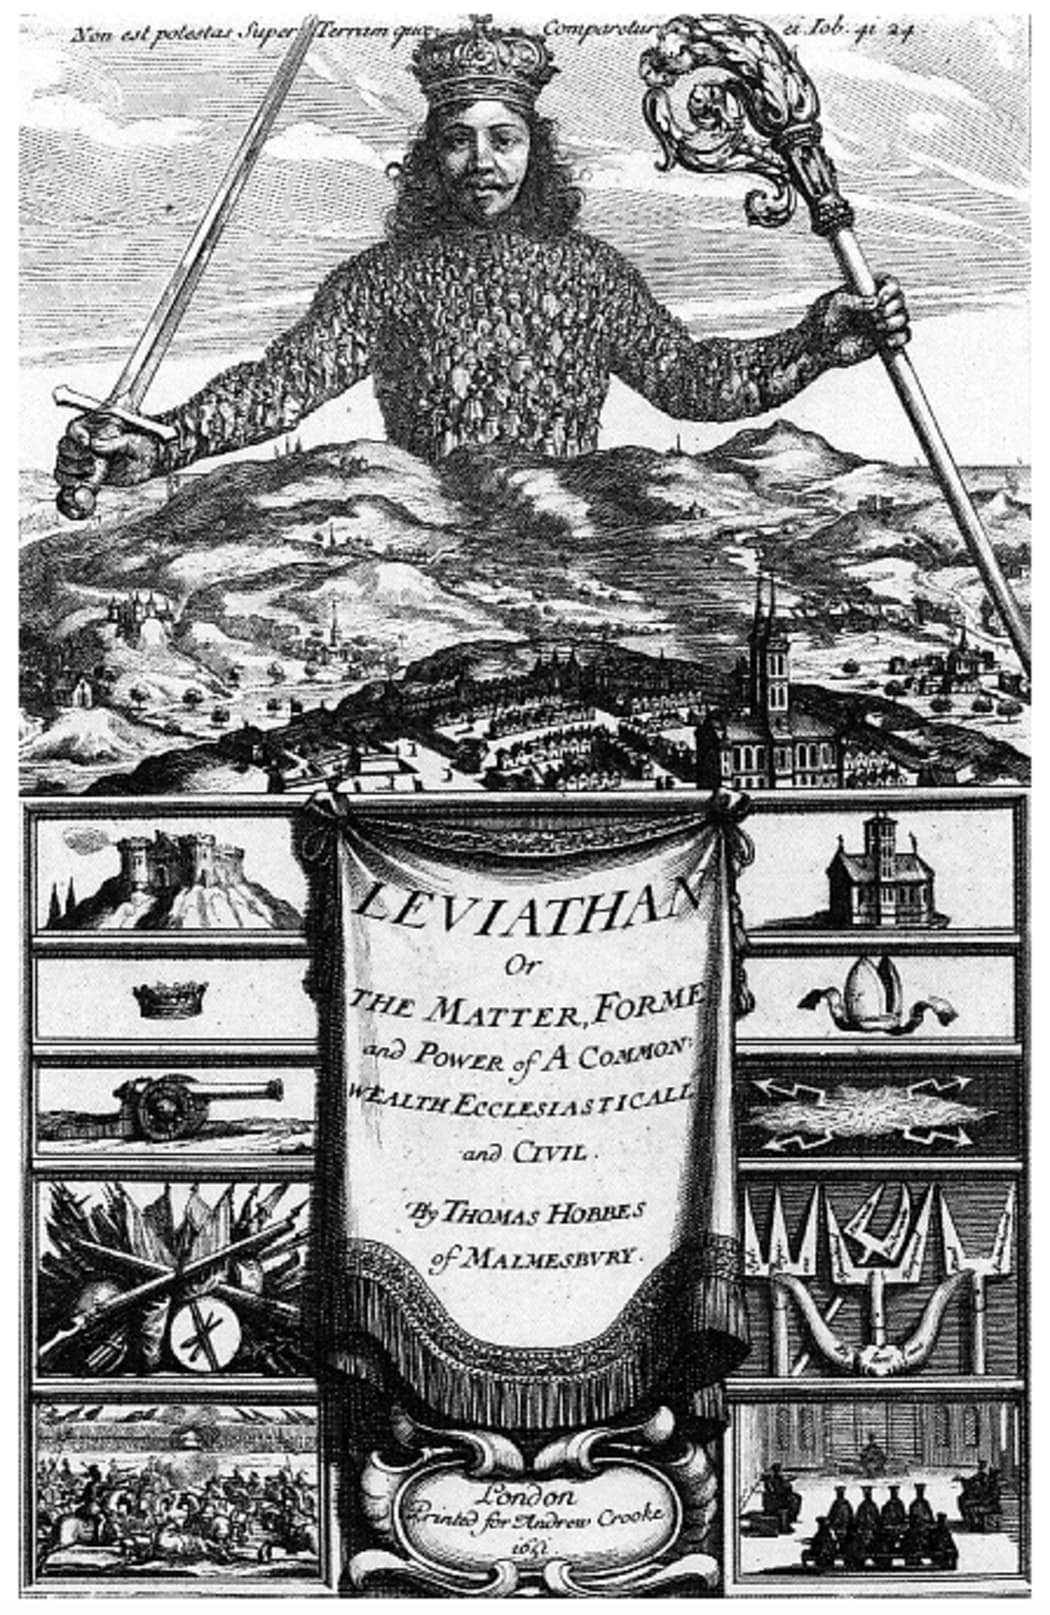 The frontispiece to Thomas Hobbes's classic of modern political philosophy, Leviathan, designed by French artist and printmaker Abraham Bosse